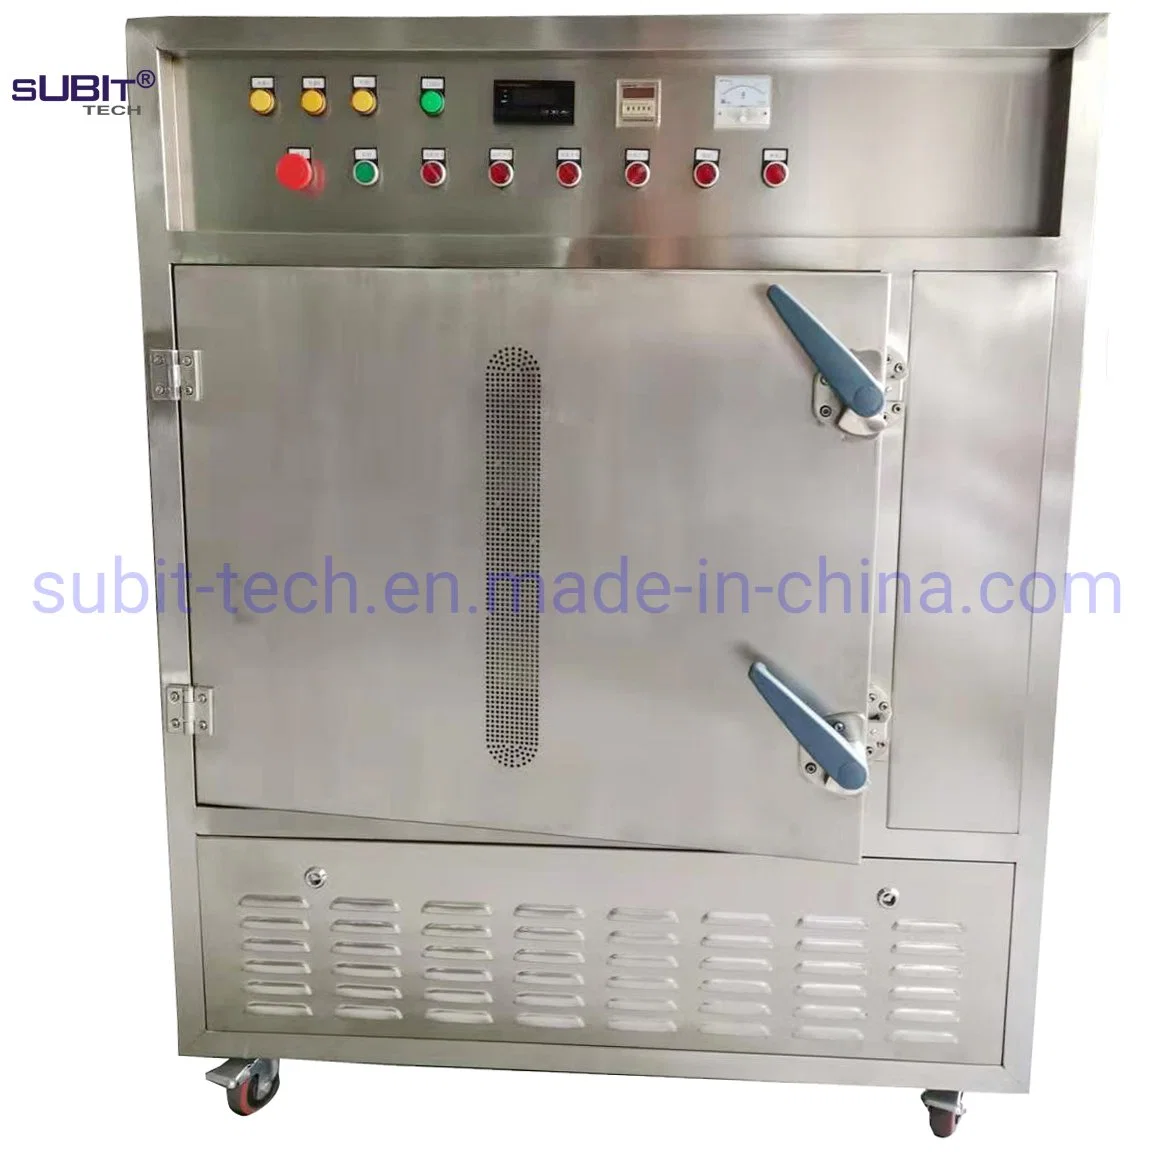 Mealworm Barley Worms Microwave Cabinet Drying Machine